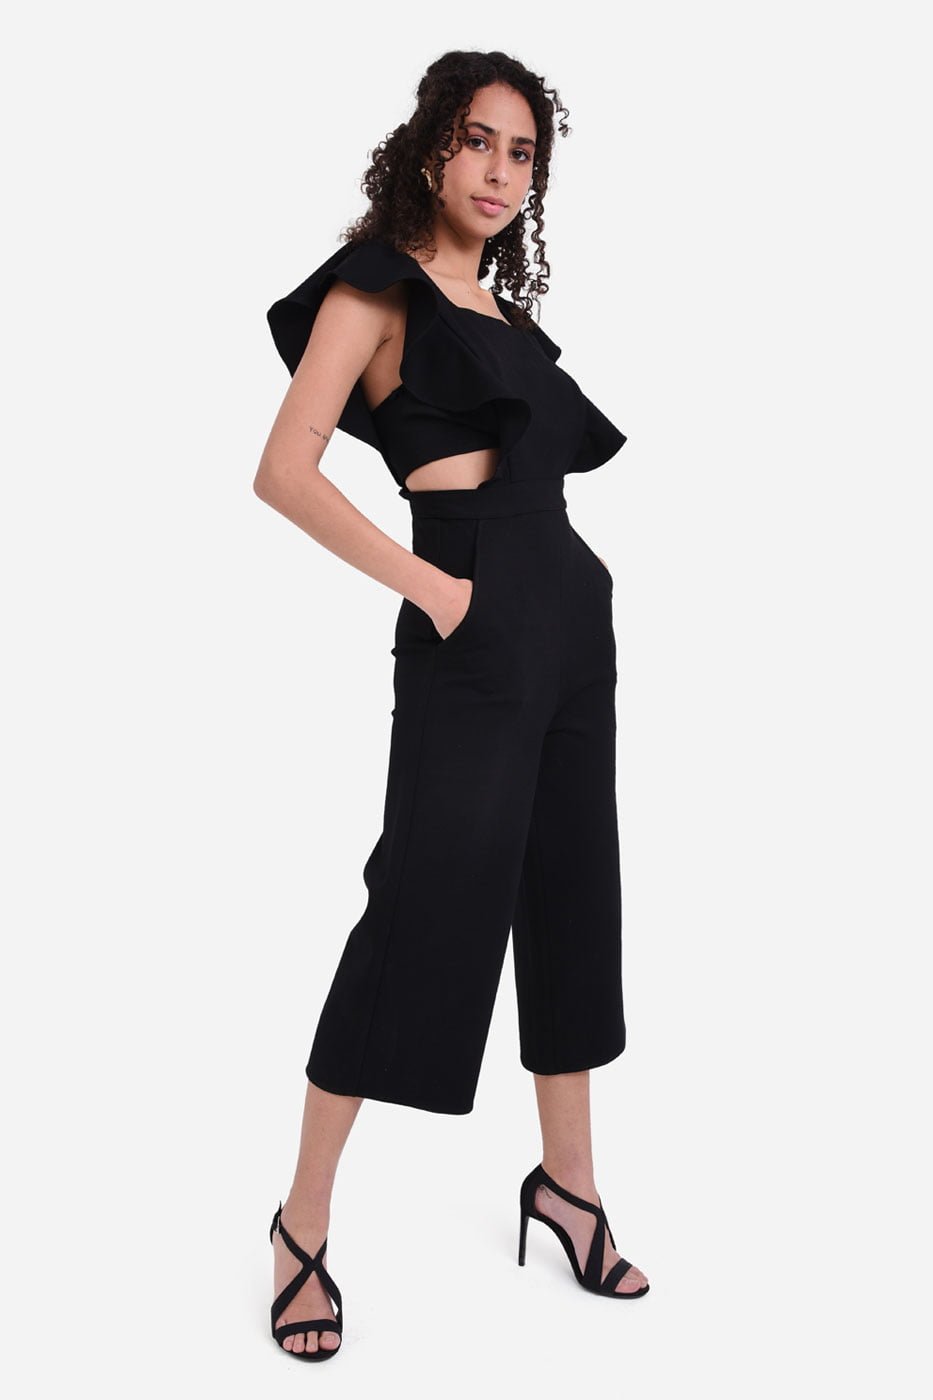 Buy CoCo black jumpsuit from DressCode - Egypt